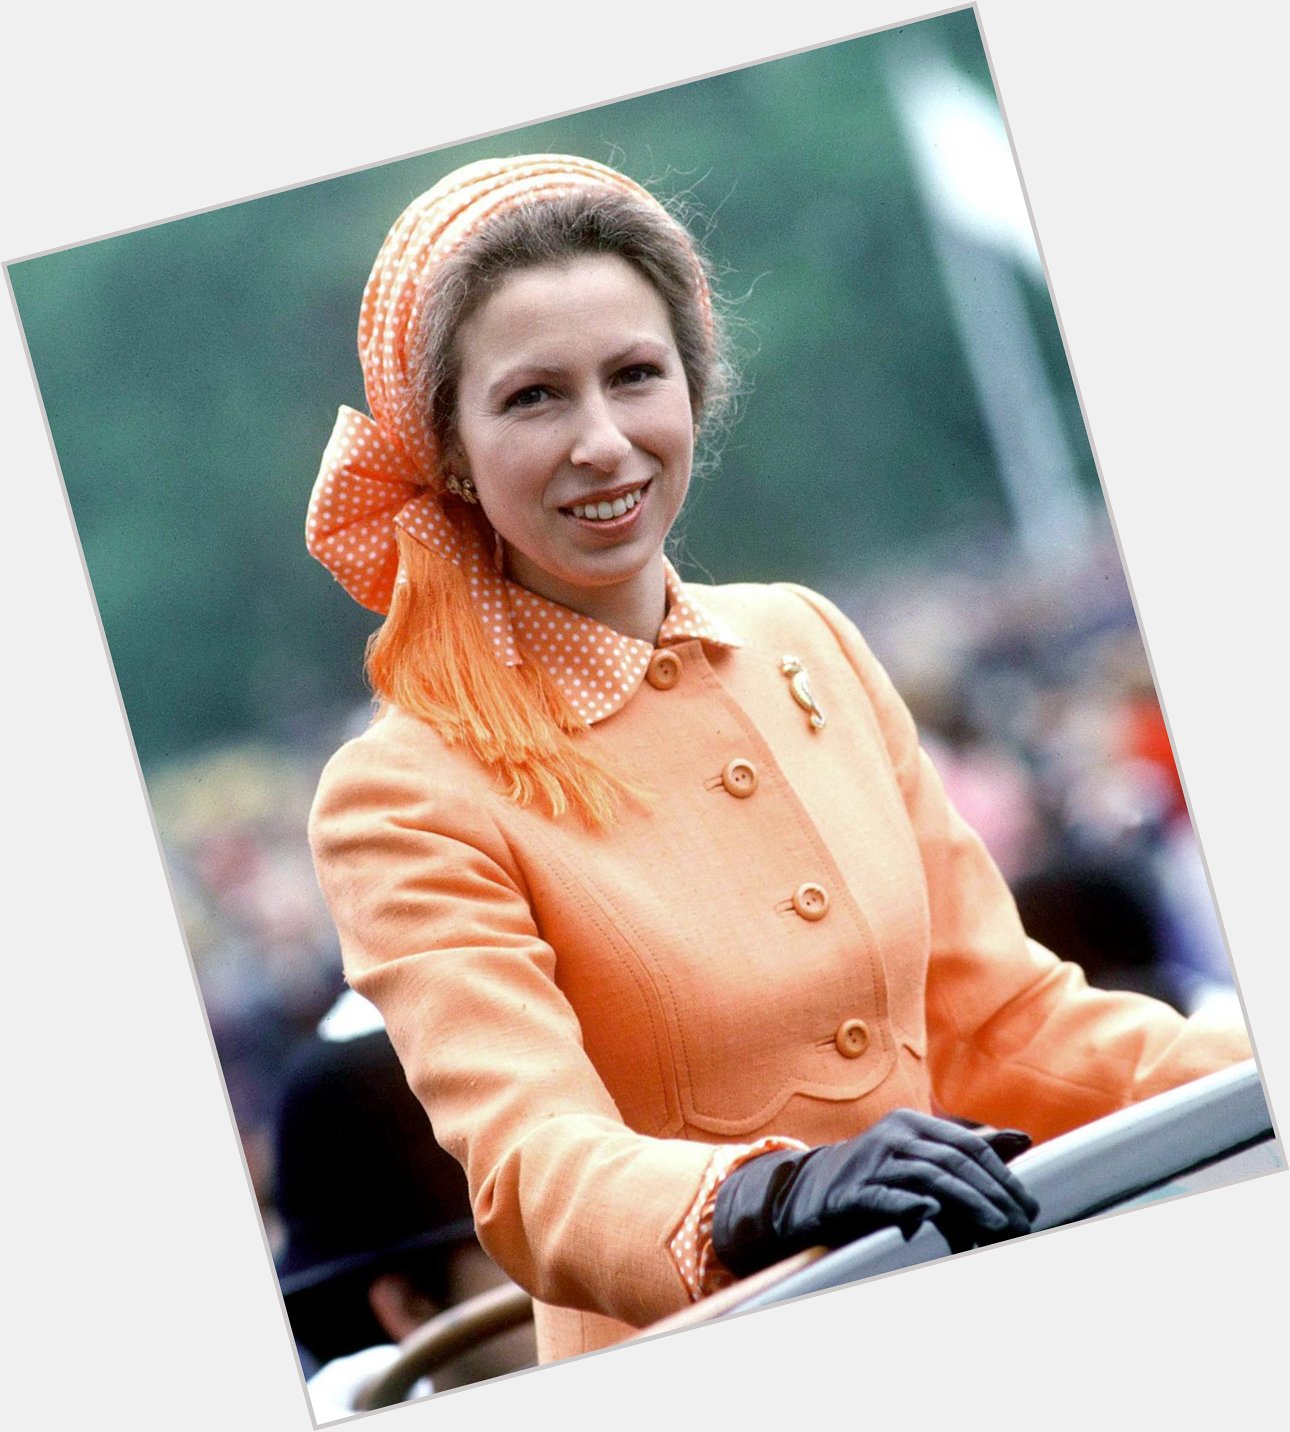 Happy Birthday to Her Royal Highness the Princess Royal, Princess Anne.

She celebrates today her 70 years old.   